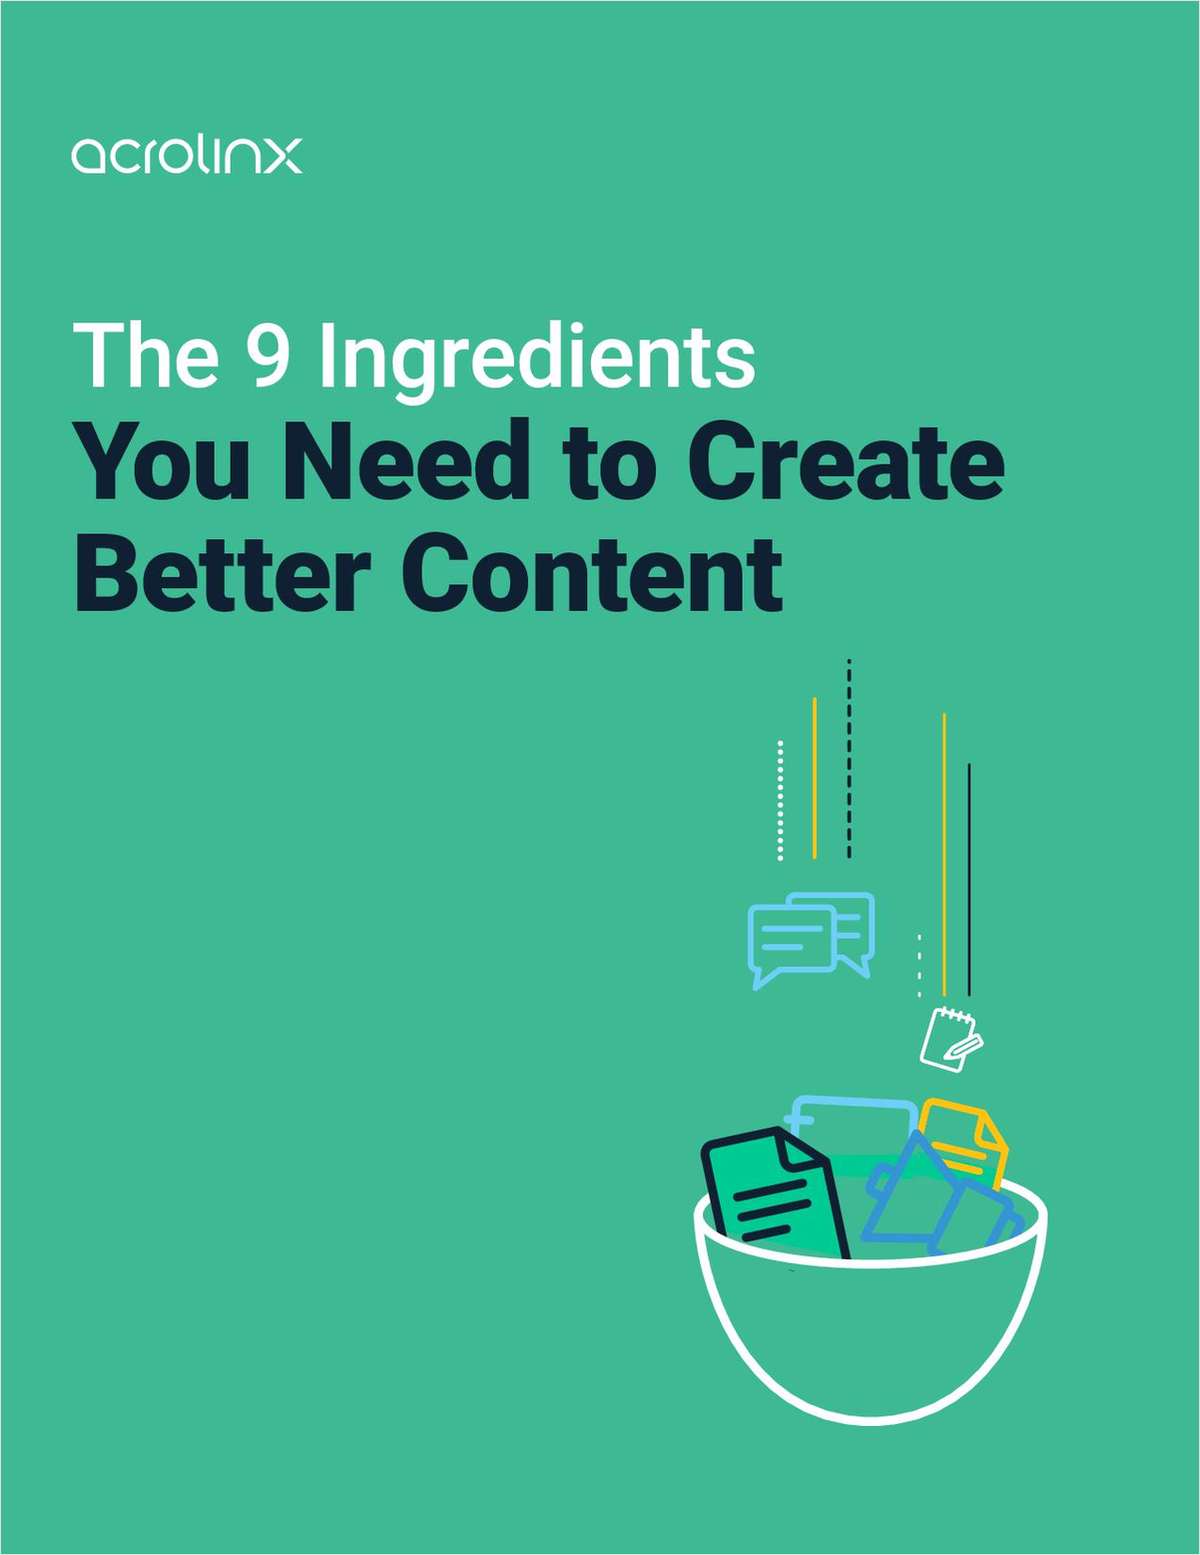 9 Ingredients You Need to Create Better Content